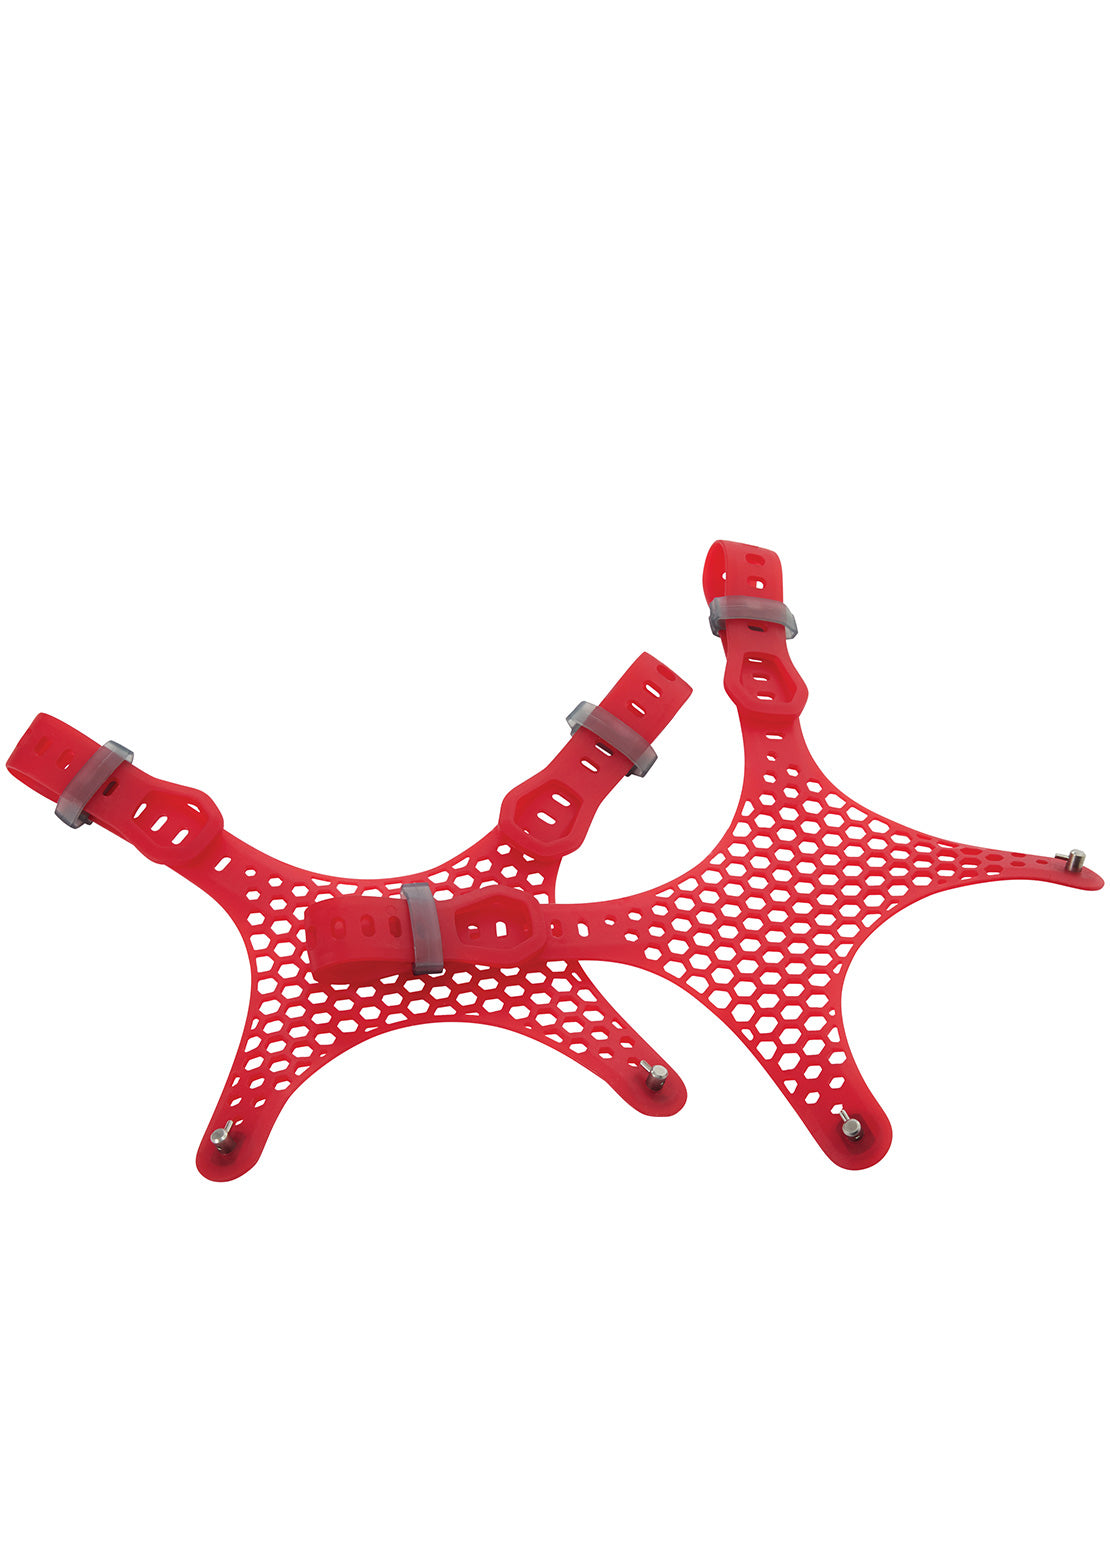 MSR Replacement Mesh Strap Red